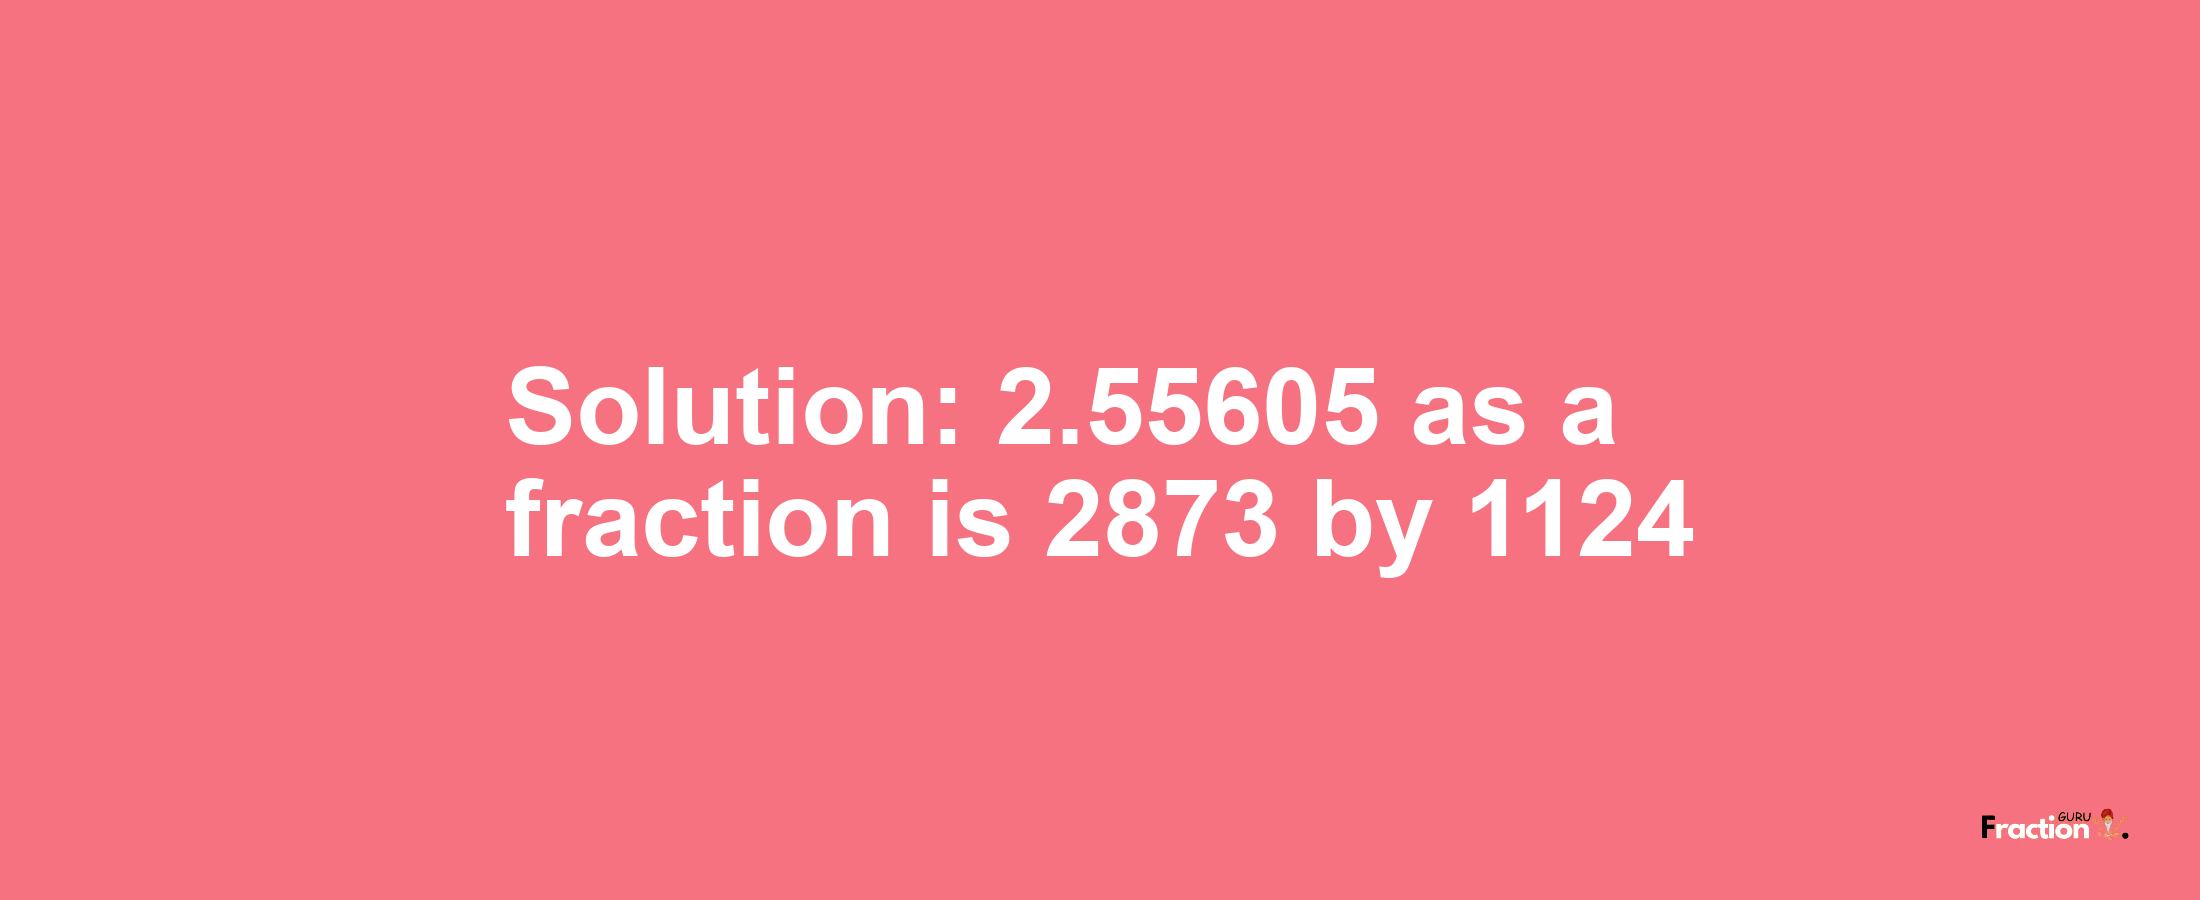 Solution:2.55605 as a fraction is 2873/1124